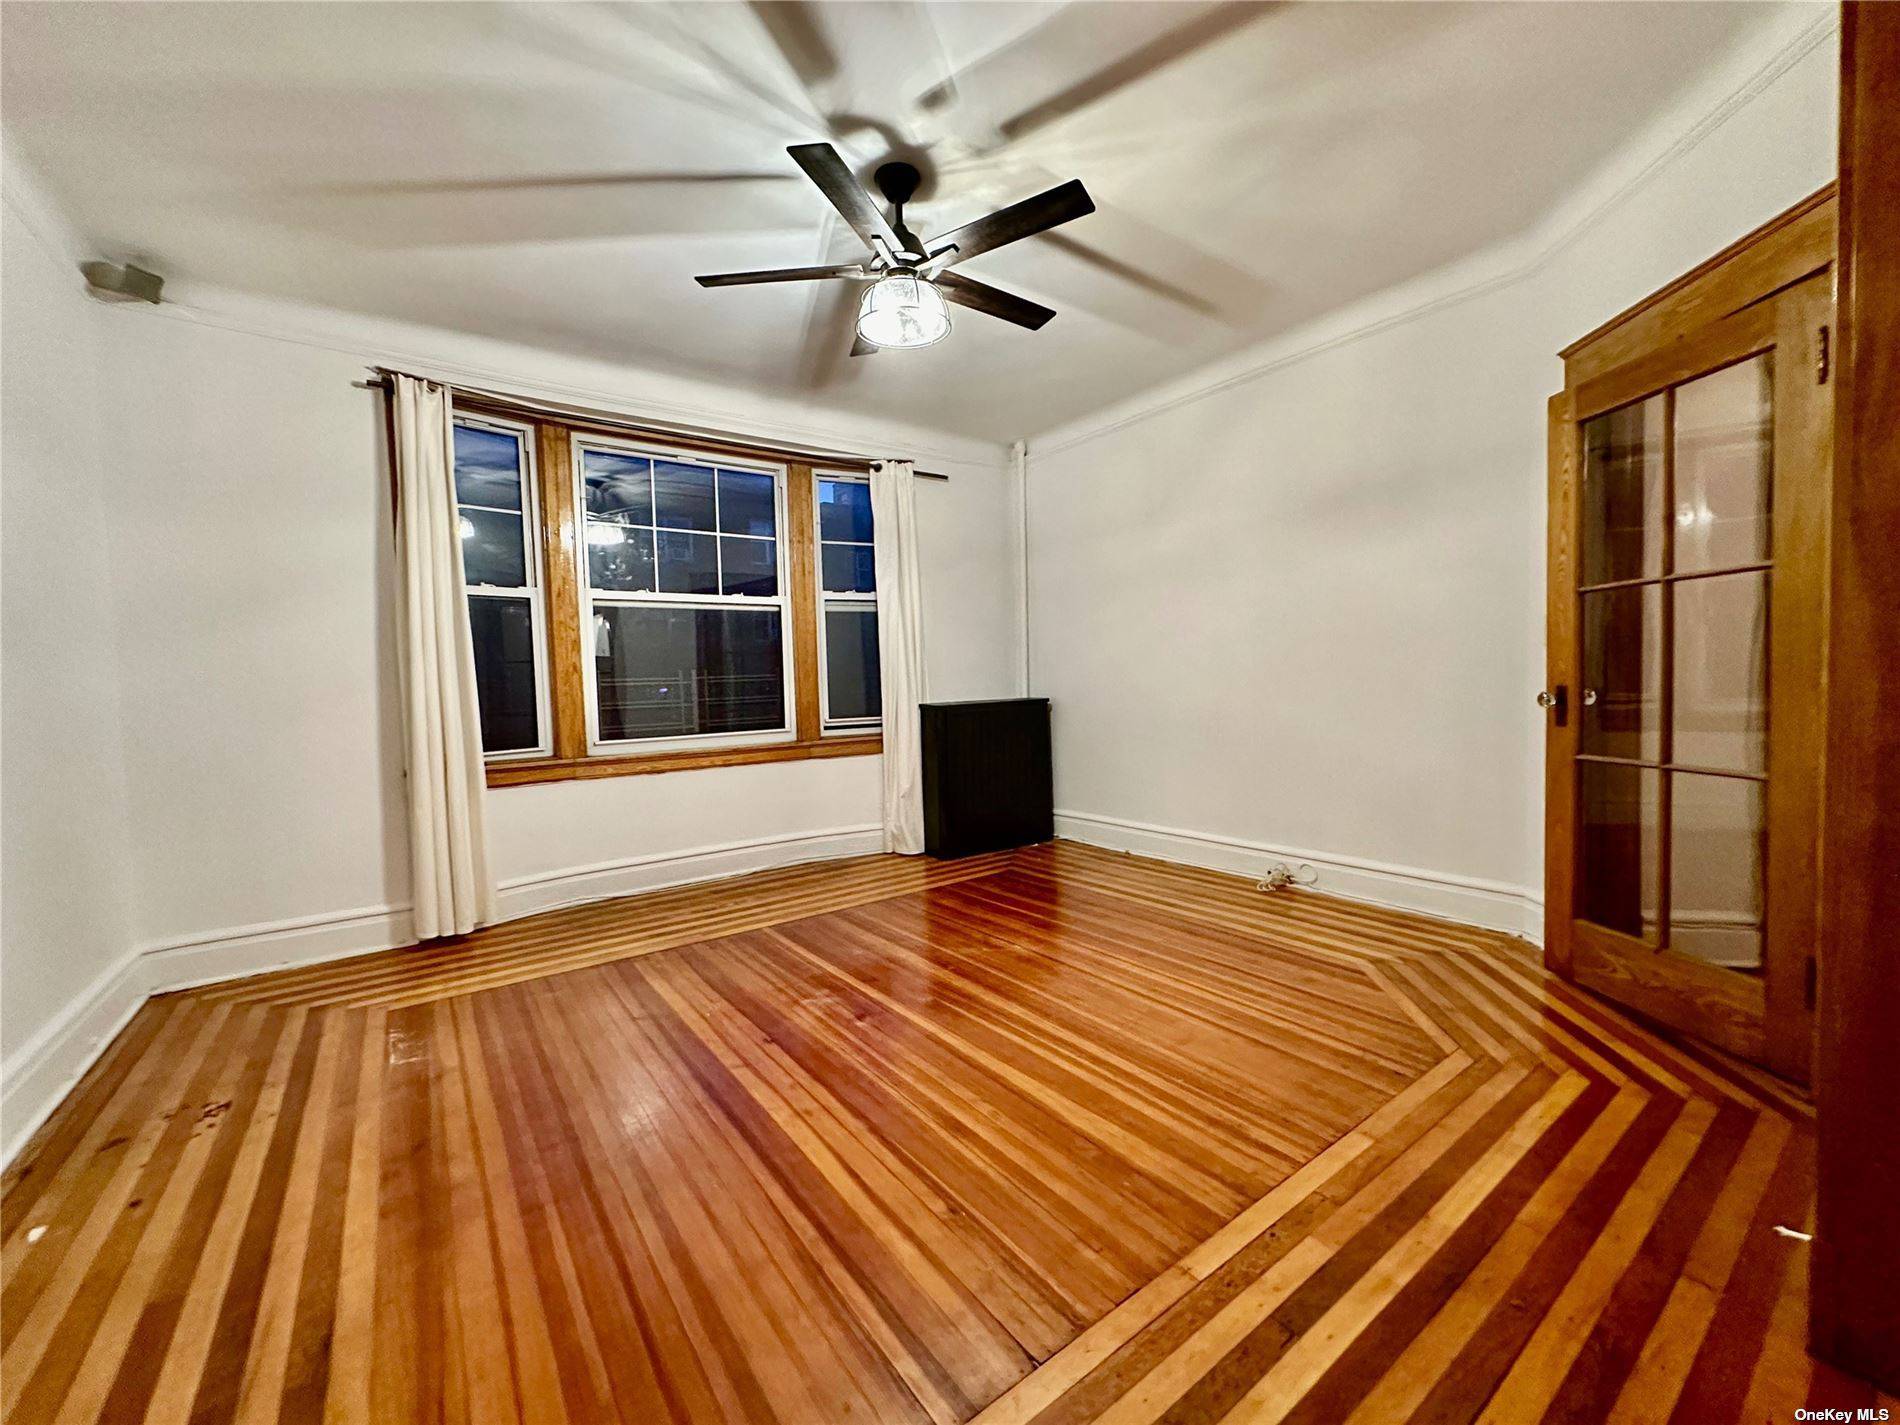 This prewar two bedroom co op in Jackson Heights is a charming living space with some great features.